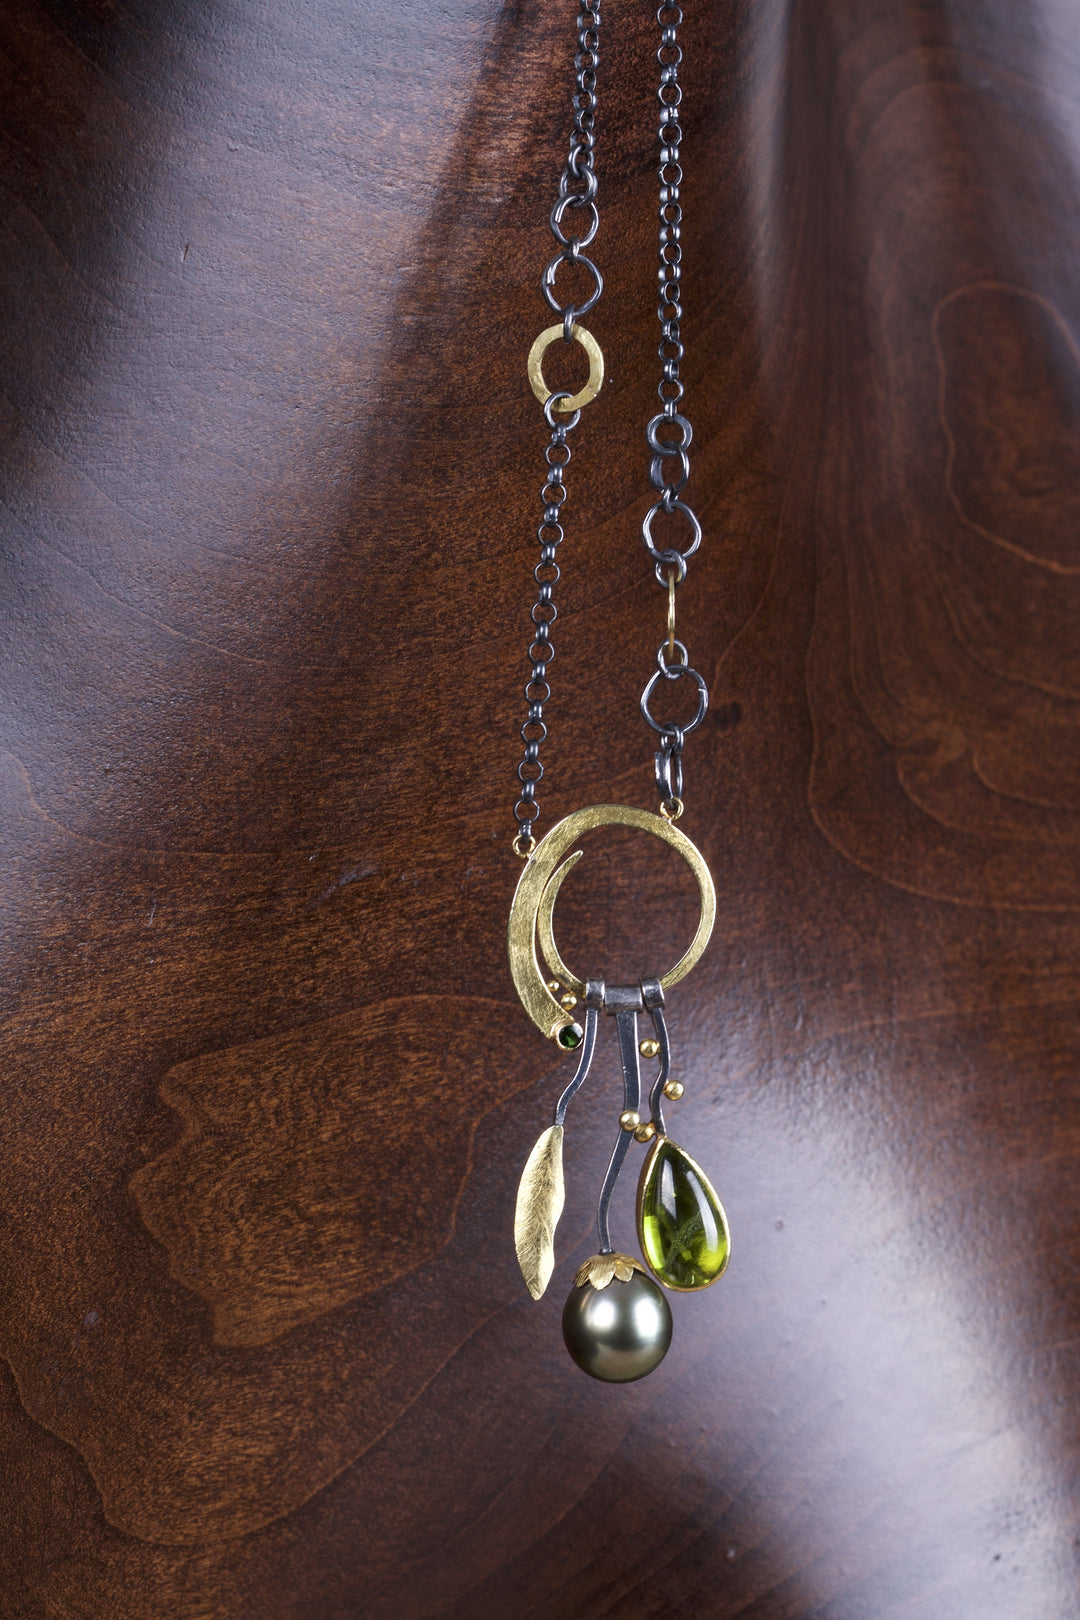 Tahitian Pearl and Peridot Necklace 05171 - Ormachea Jewelry